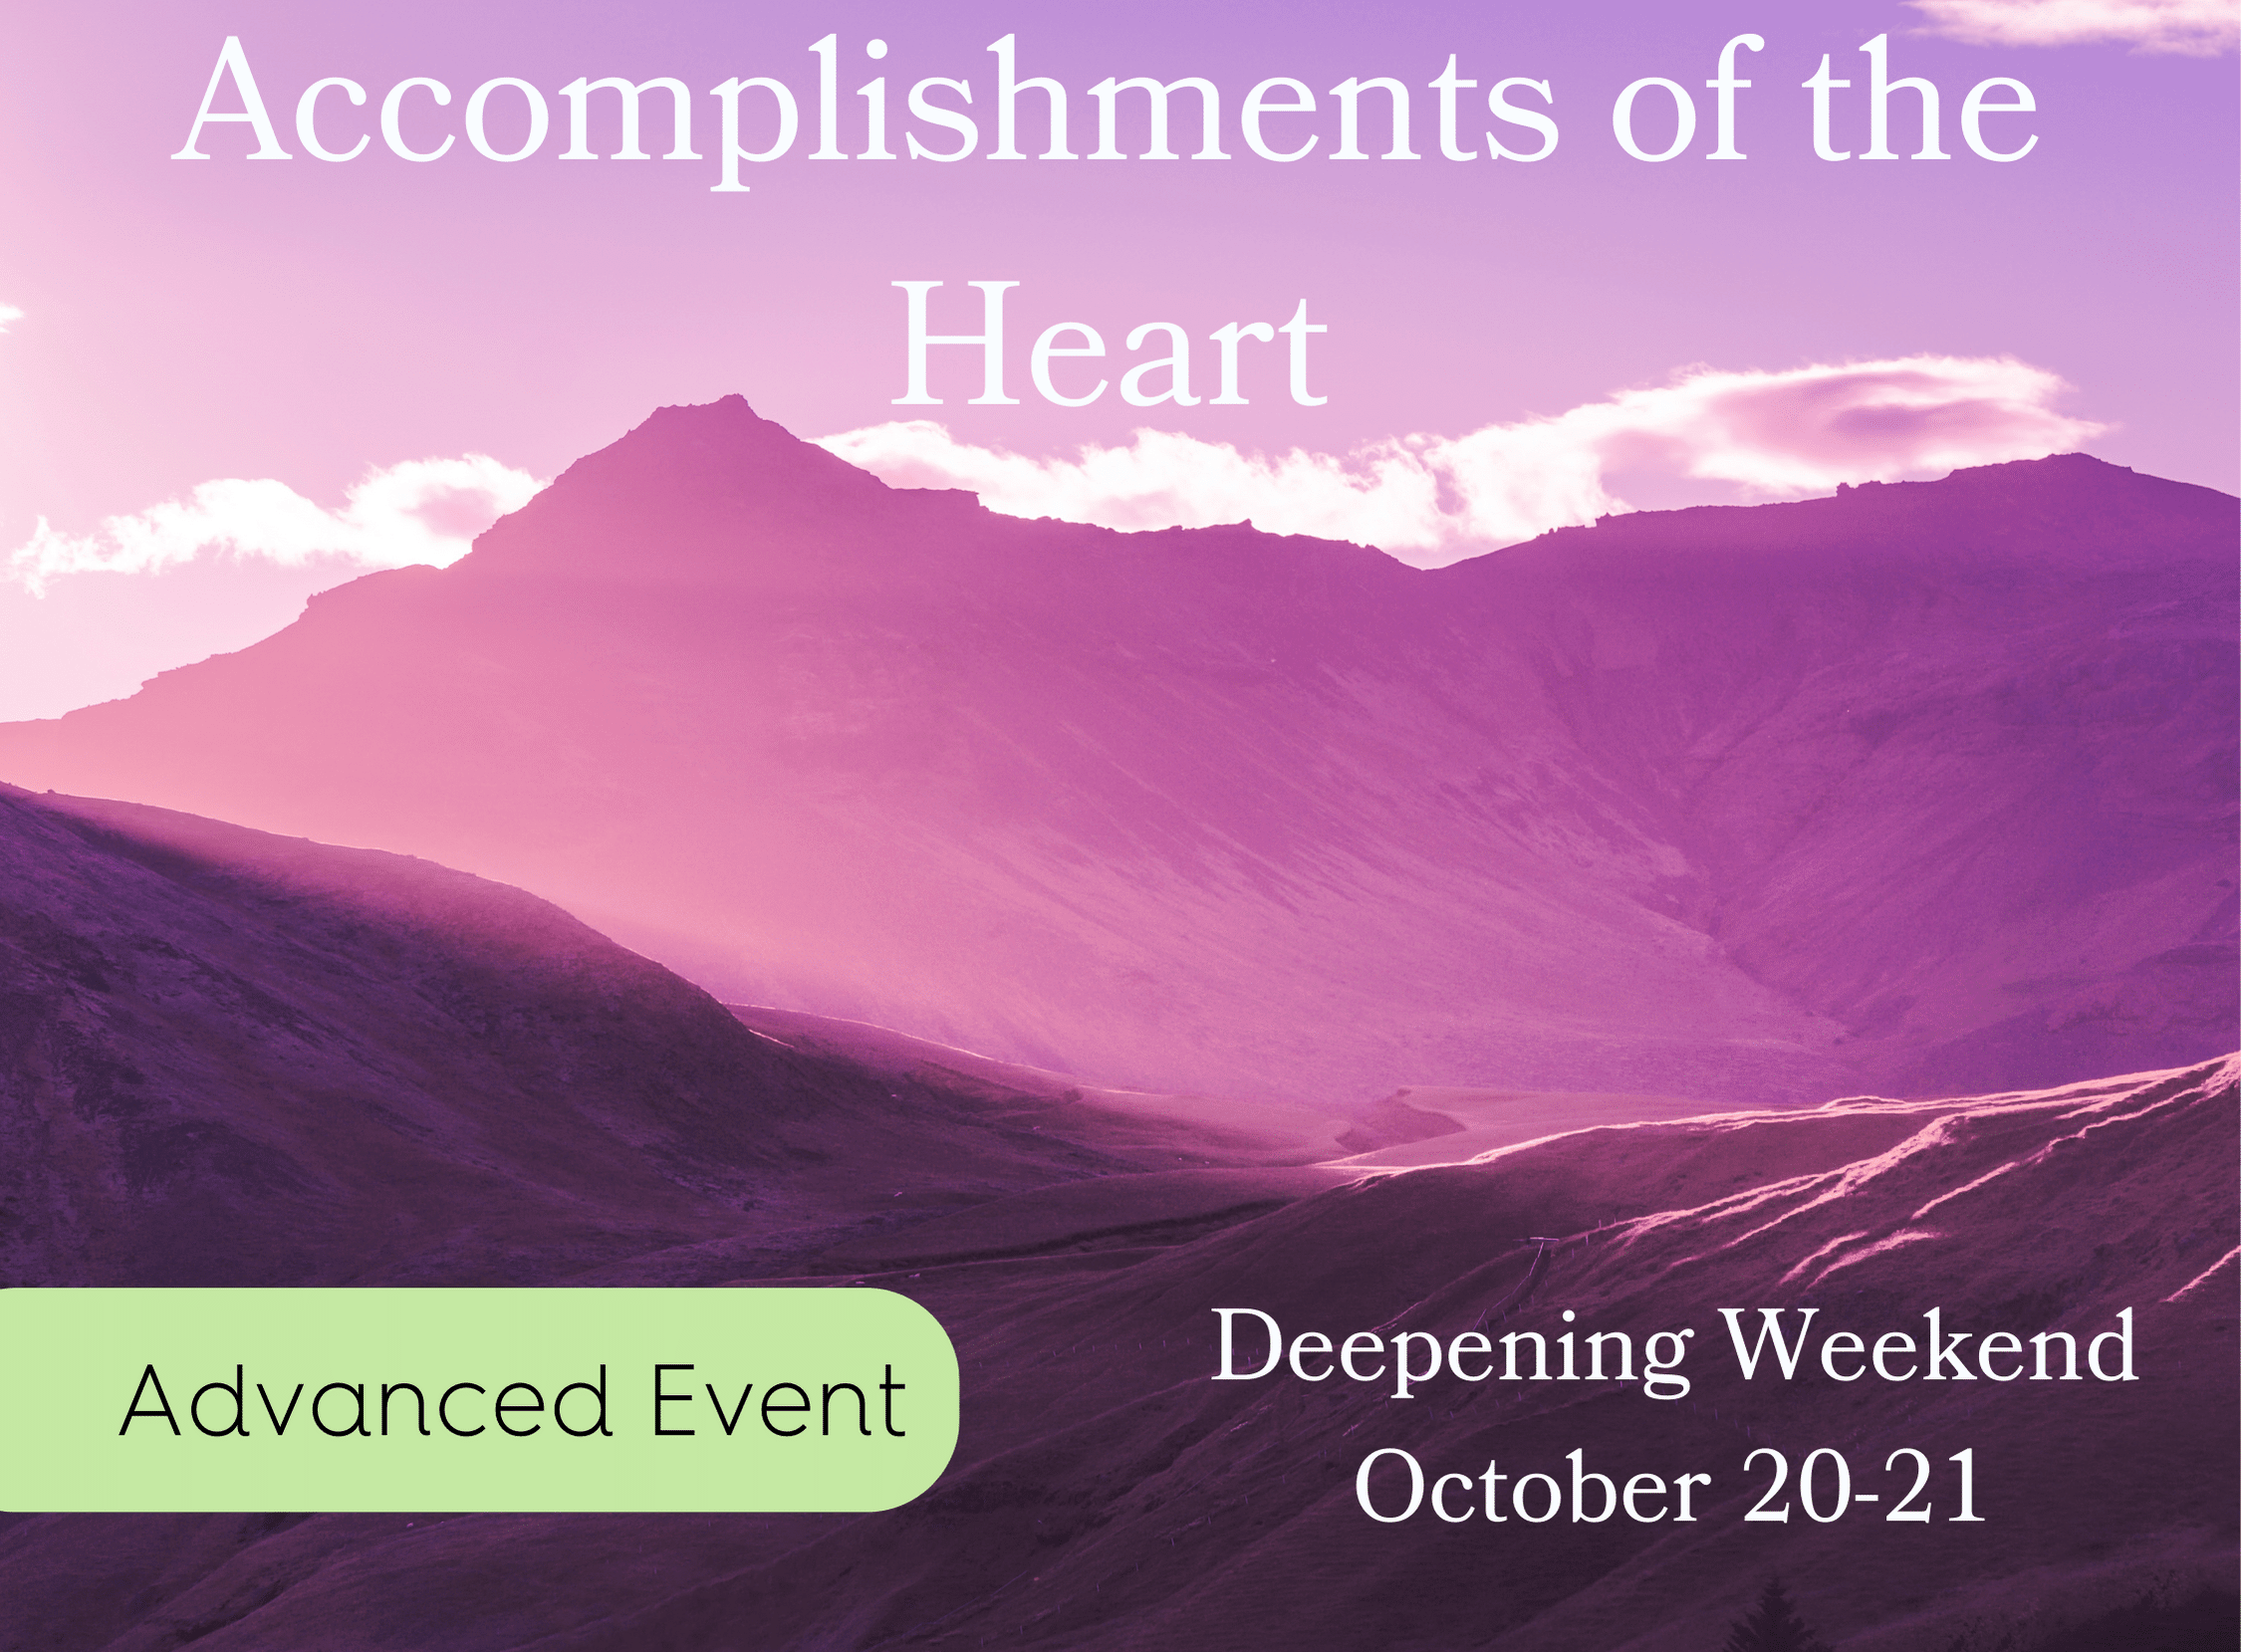 Accomplishments of the Heart Deepening Weekend